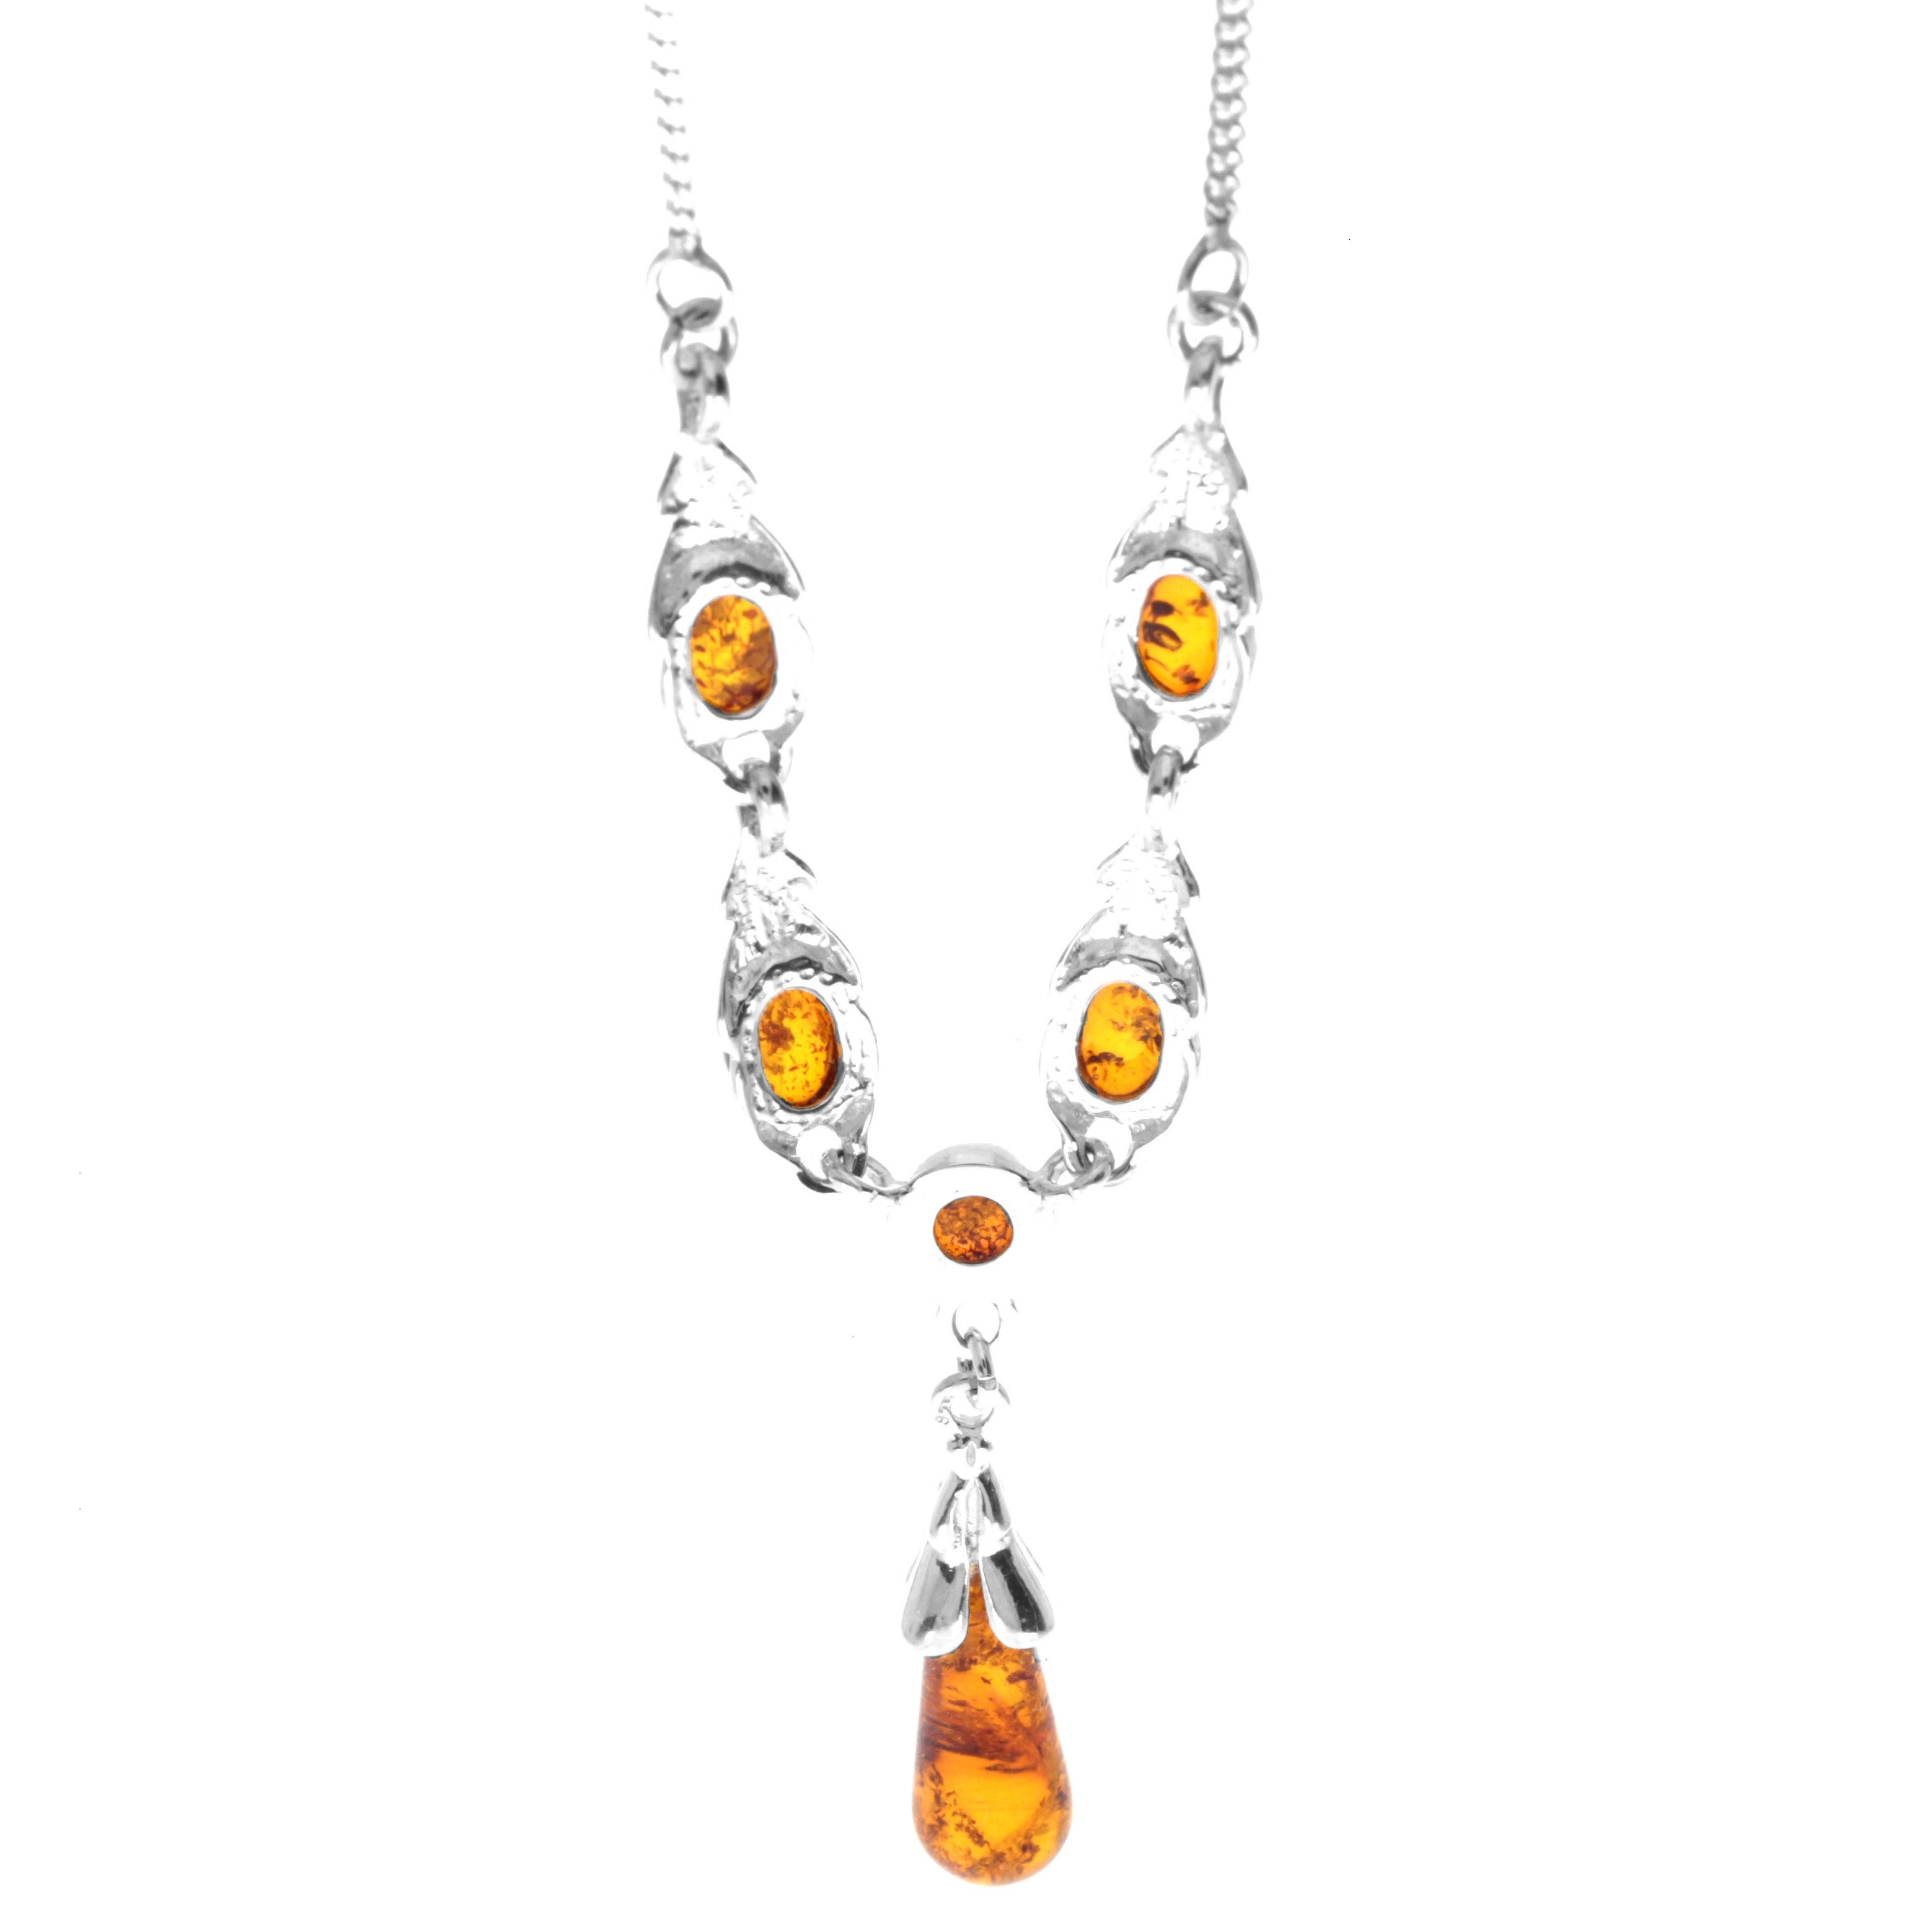 925 Sterling Silver & Genuine Baltic Amber Classic Necklace on Curbs Chain - GL924